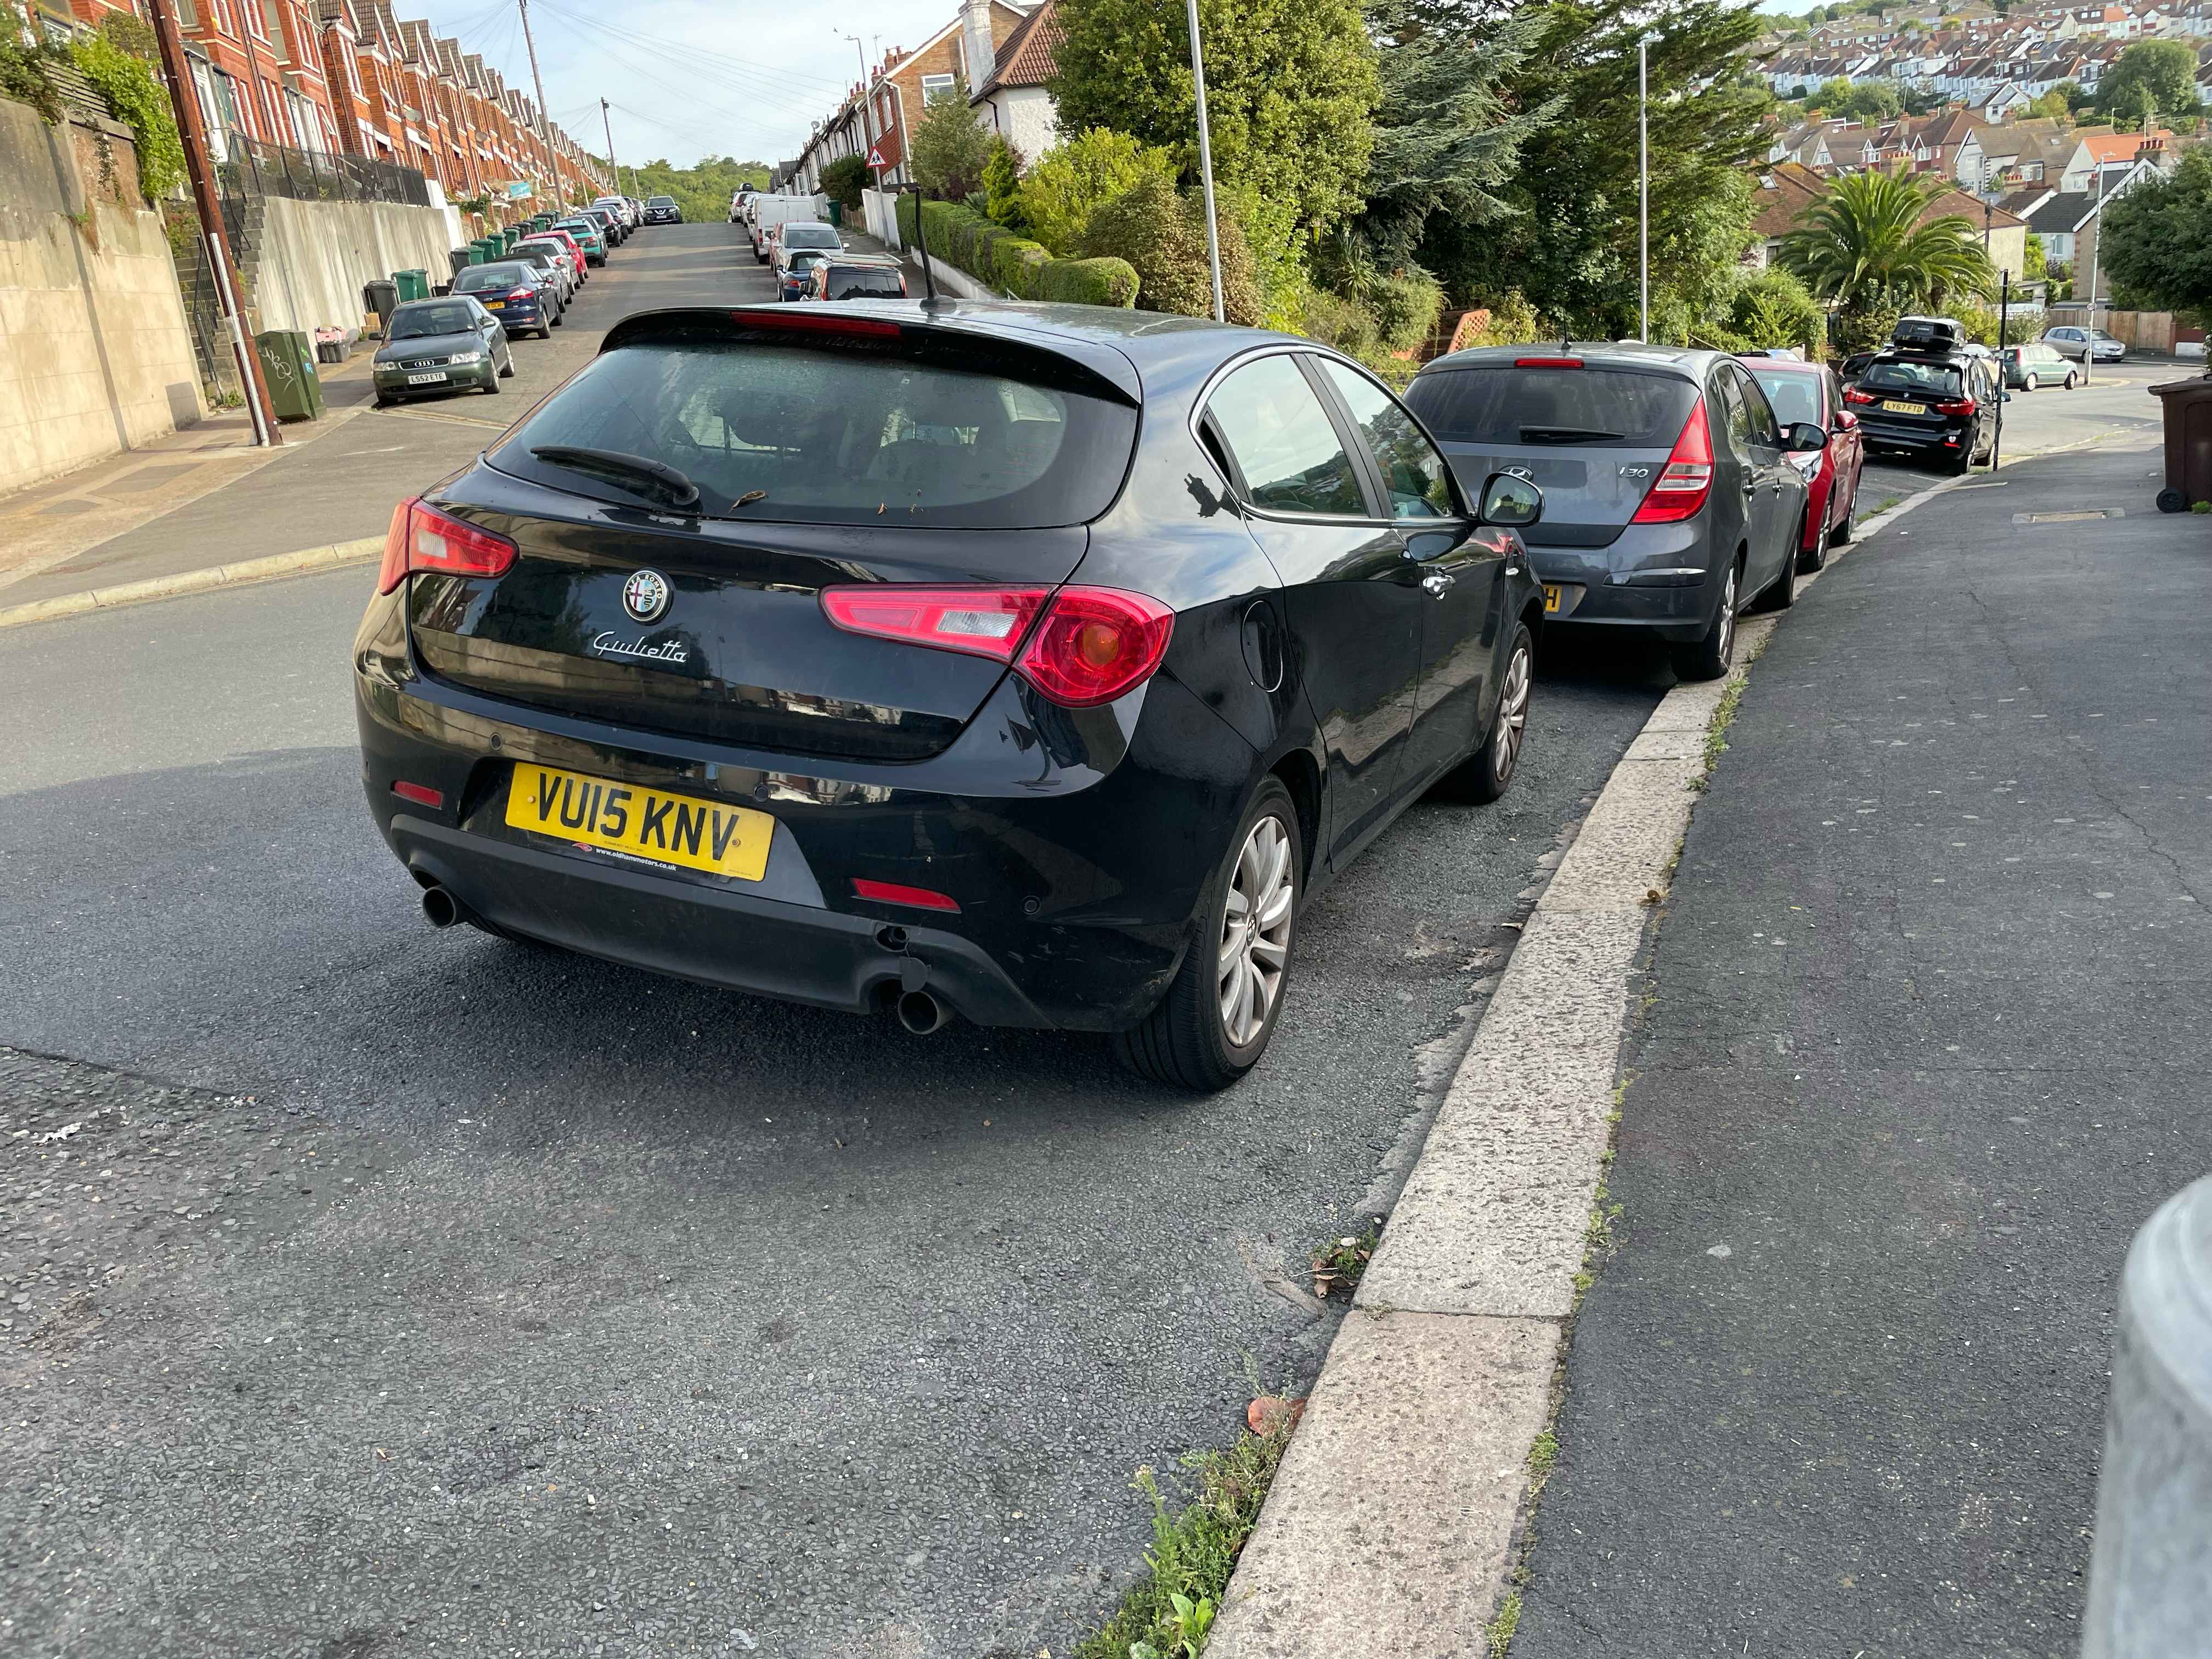 Photograph of VU15 KNV - a Black Alfa Romeo Giulietta parked in Hollingdean by a non-resident. The third of ten photographs supplied by the residents of Hollingdean.